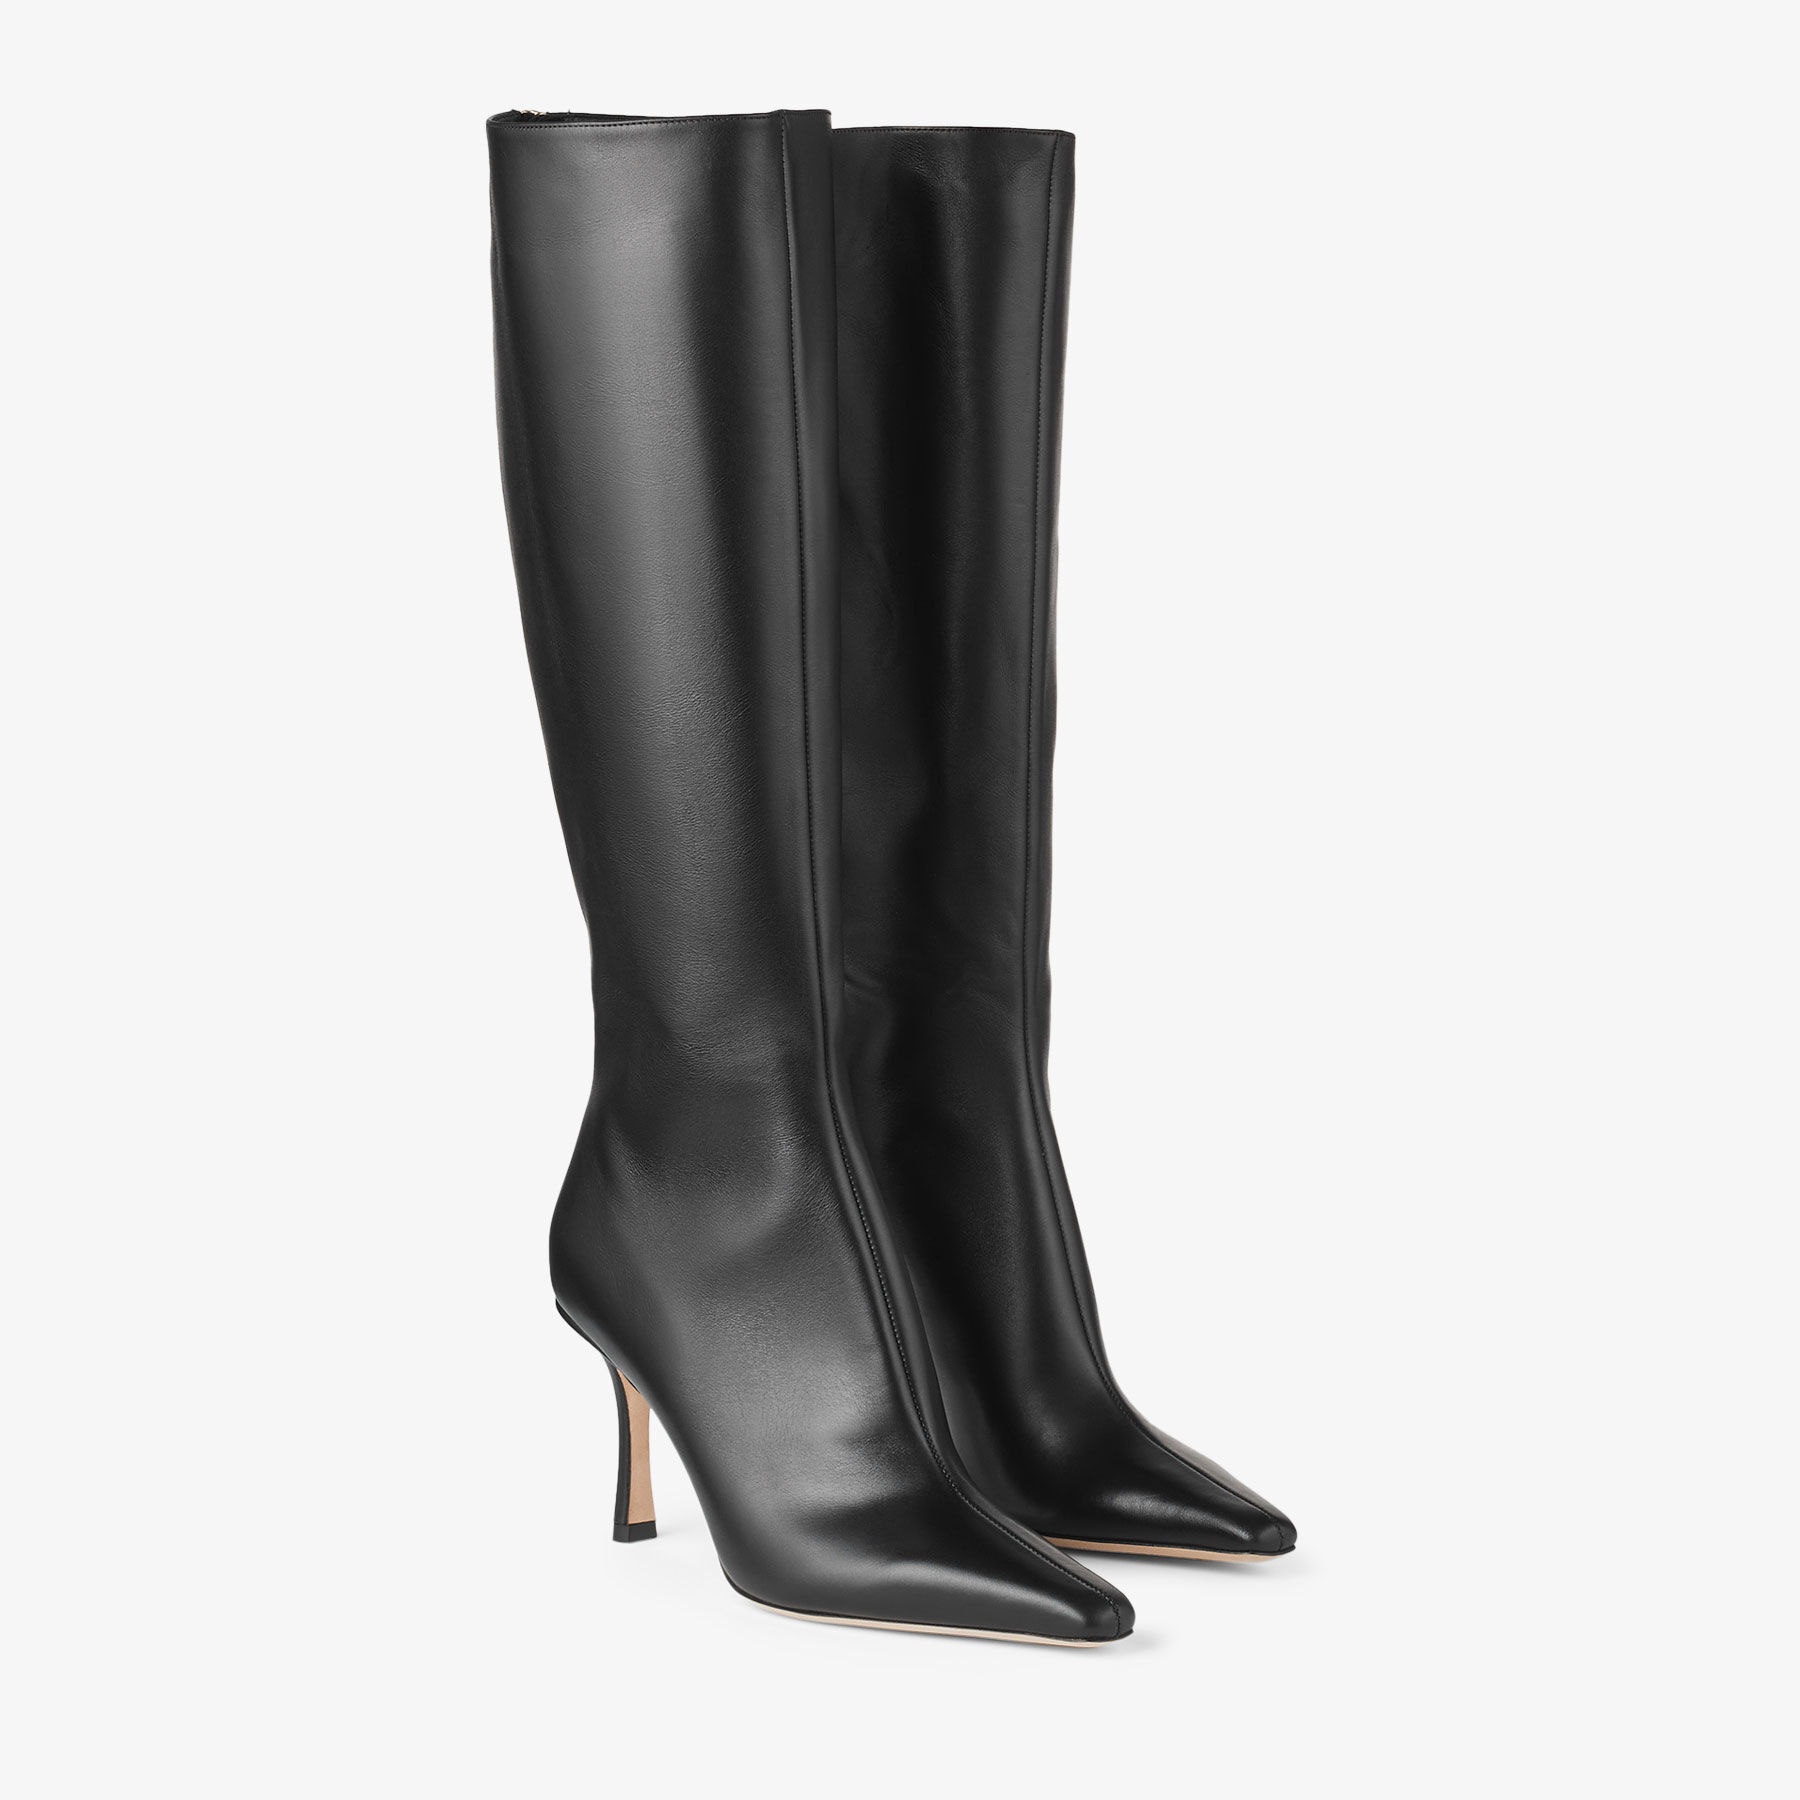 Agathe Knee Boot 85
Black Calf Leather Knee-High Boots - 3